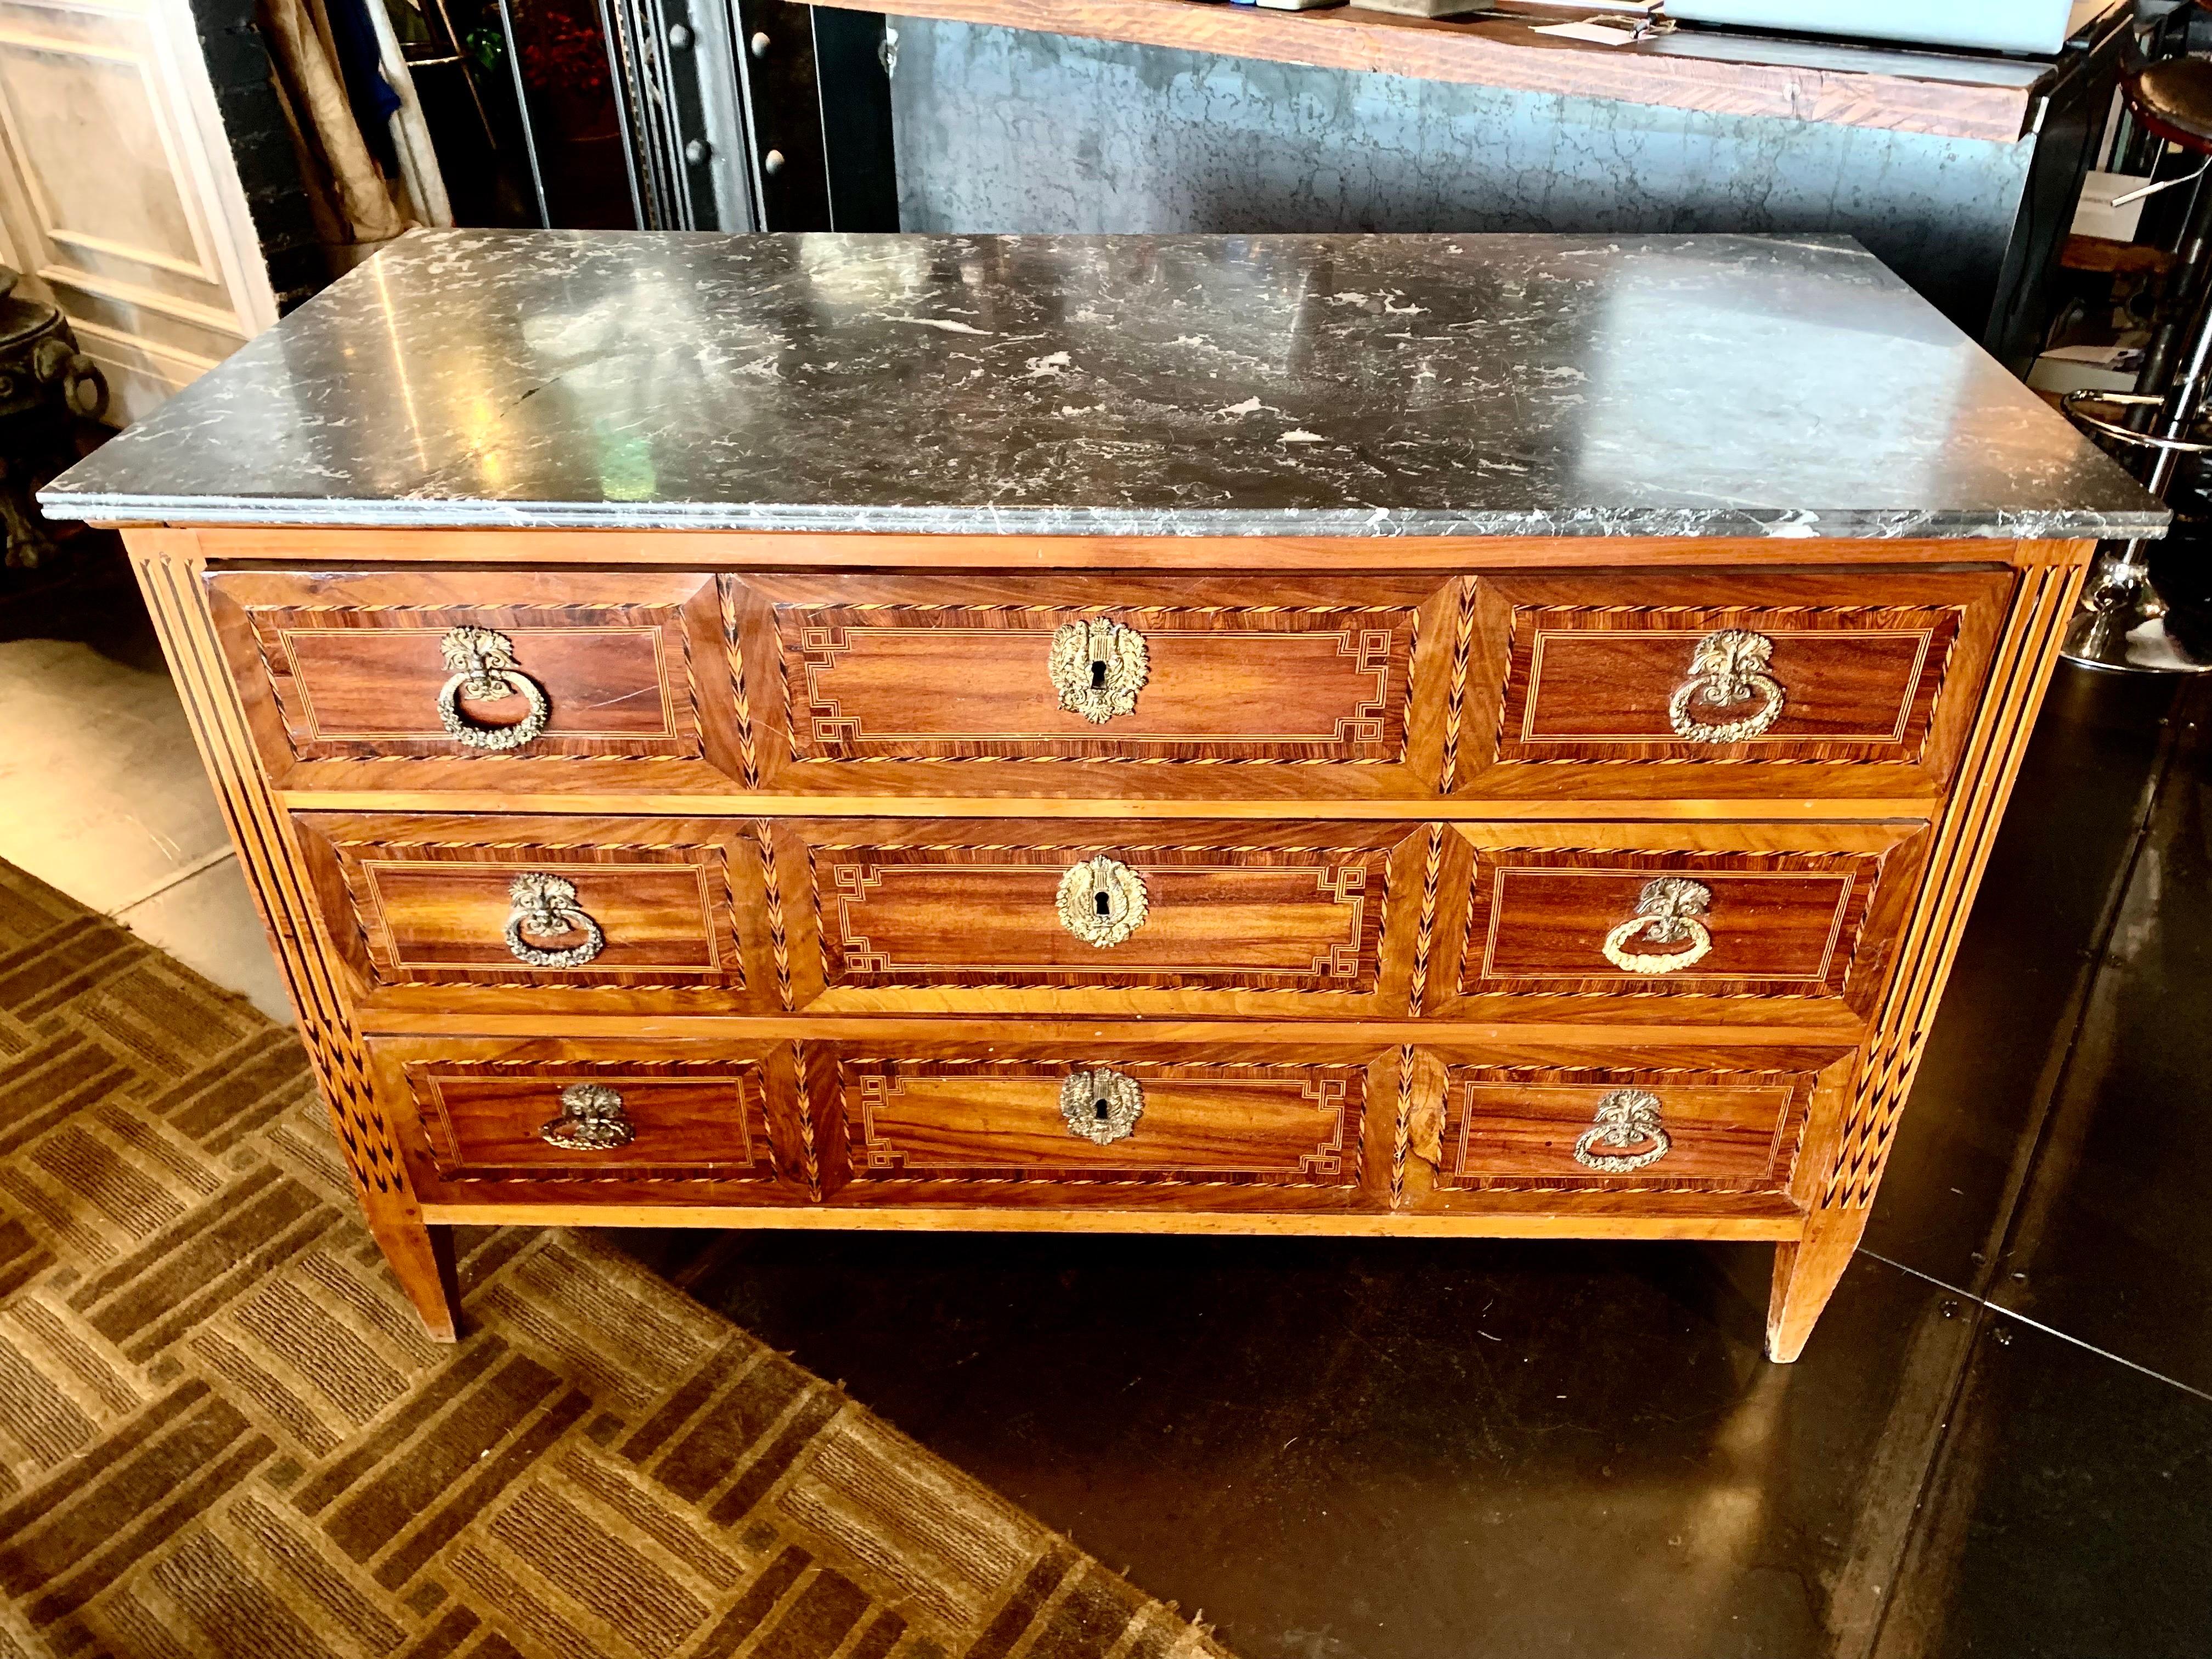 French chest of drawers from the early 19th century, Louis XVI style, in walnut with different types of wood marquetry, with lime Wood and and black bog oak, has three drawers with bronze handles and keyholes, the top rd dr dark gray marble edged